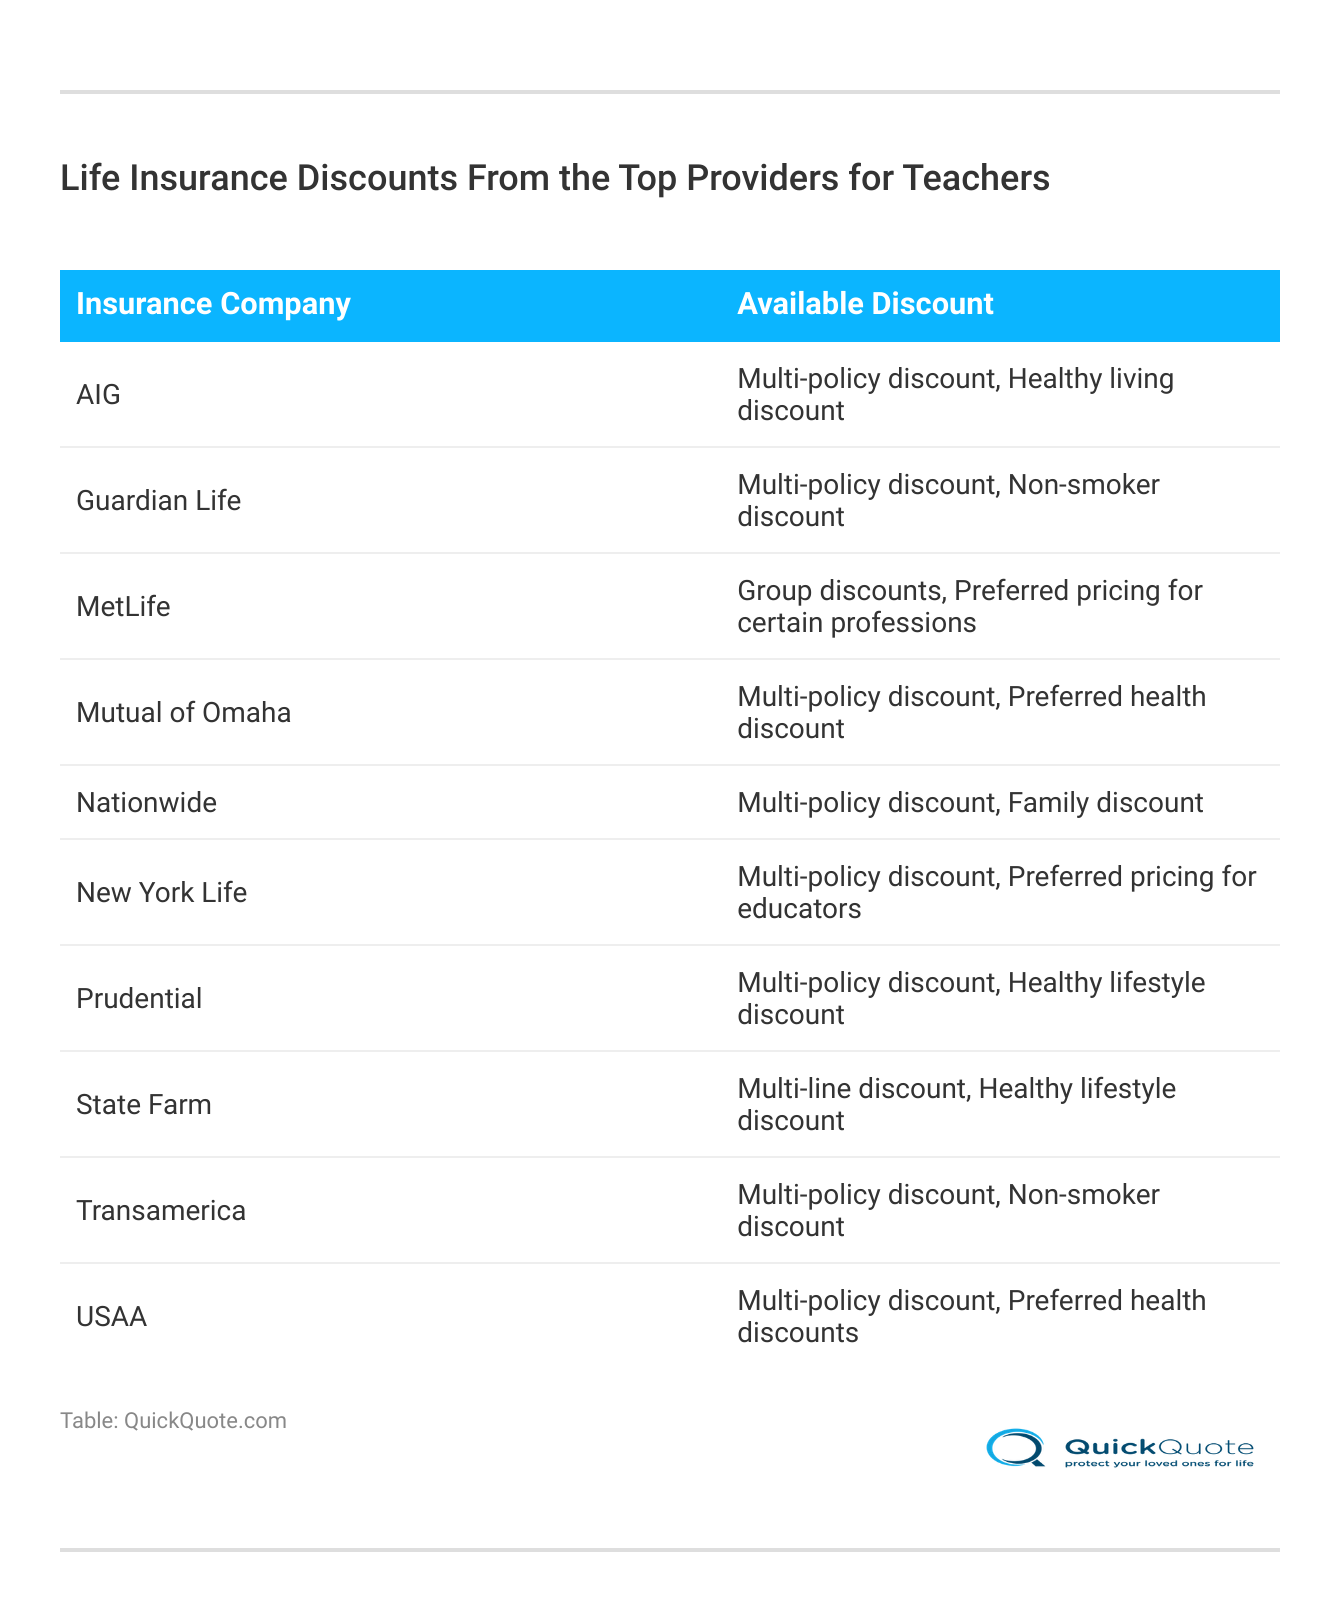 <h3>Life Insurance Discounts From the Top Providers for Teachers</h3>